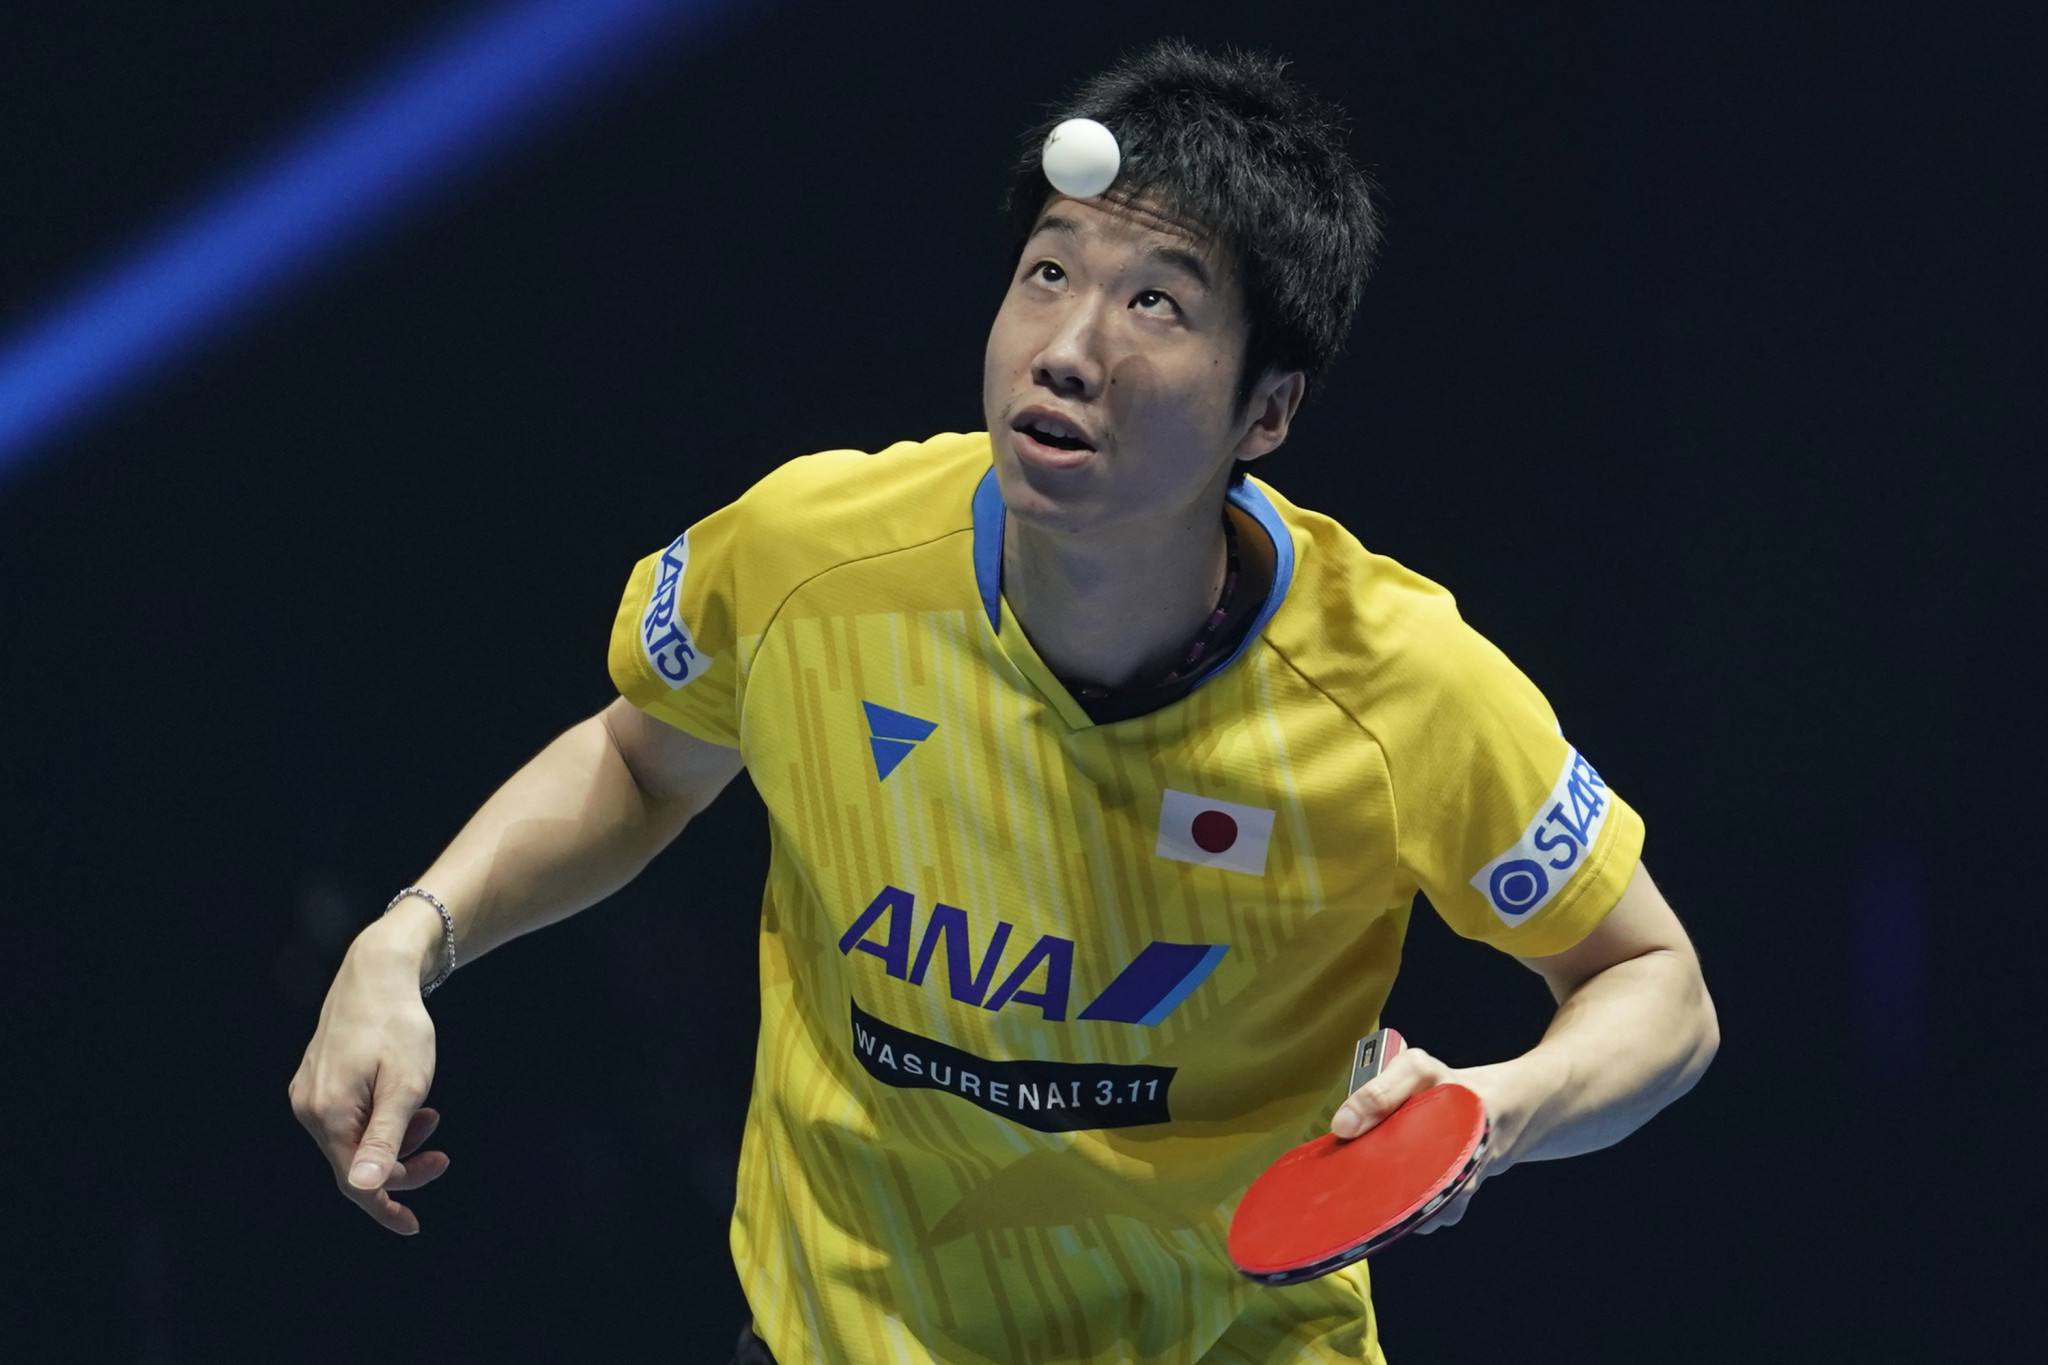 Mizutani reaches fourth Olympics after Japanese table tennis team named for Tokyo 2020